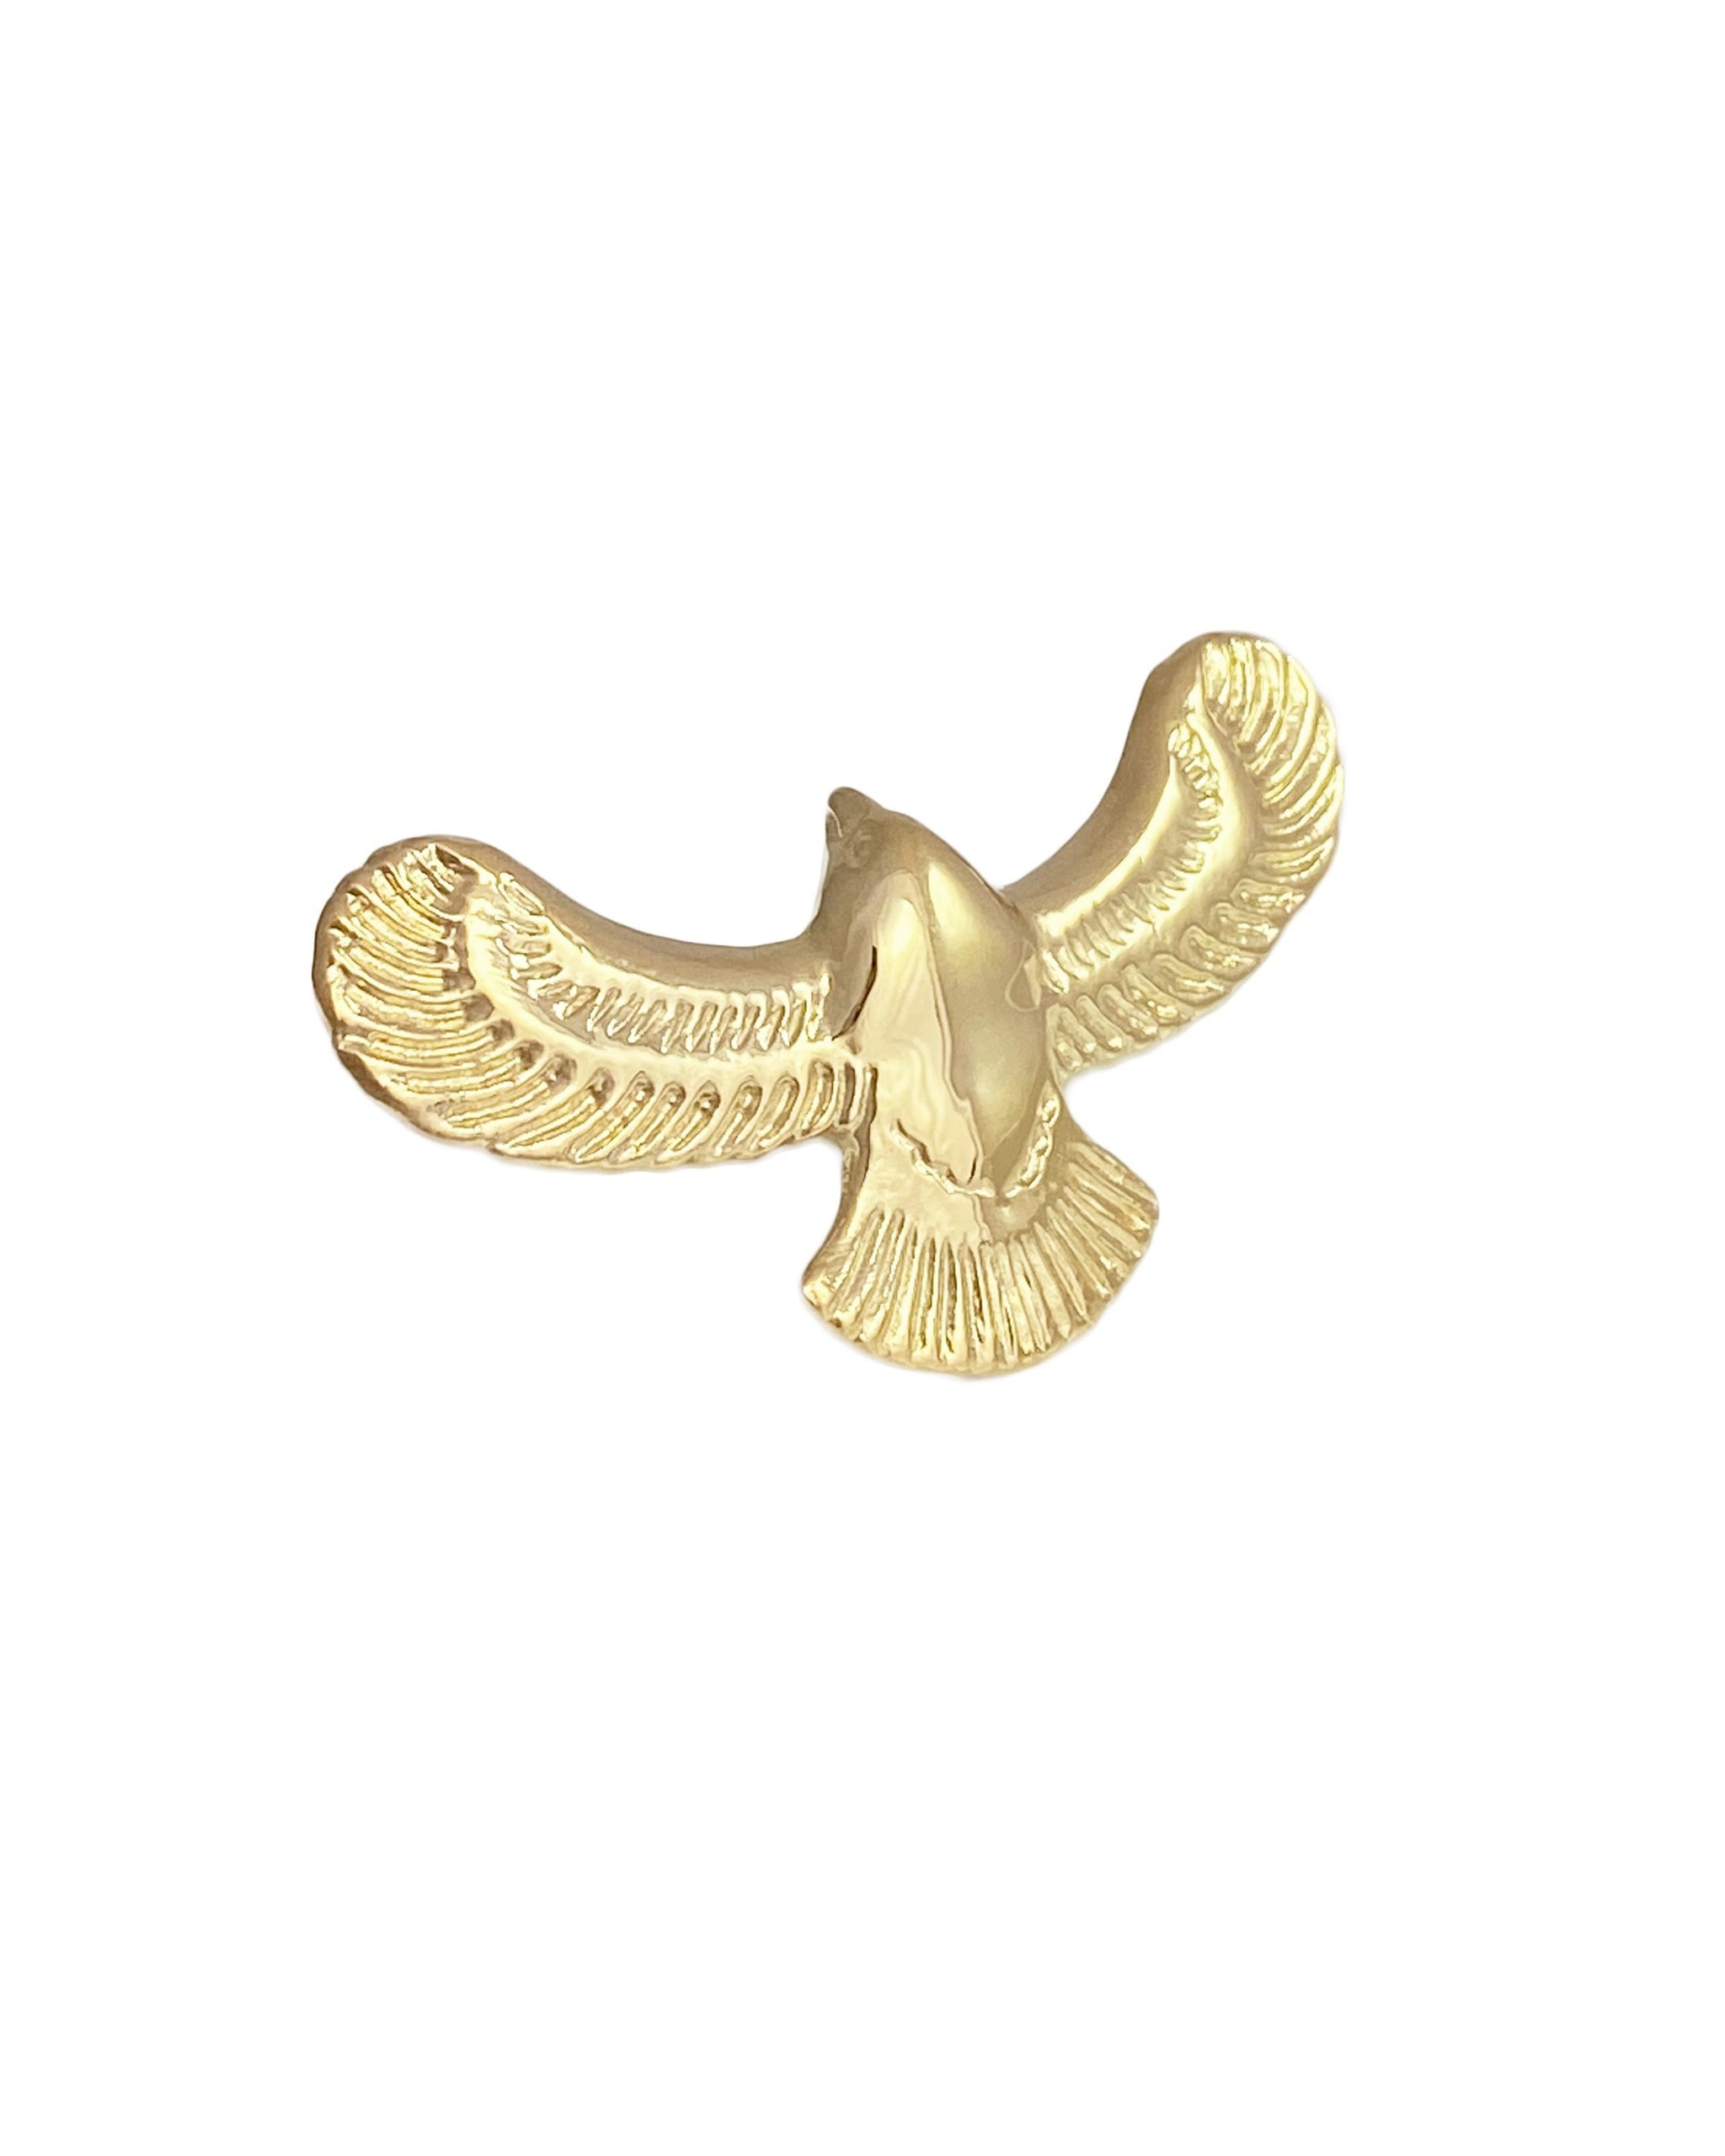 Fleetwood Ring, 14k Gold Vermeil Eagle Ring, Handmade by Turquoise + Tobacco in Los Angeles California